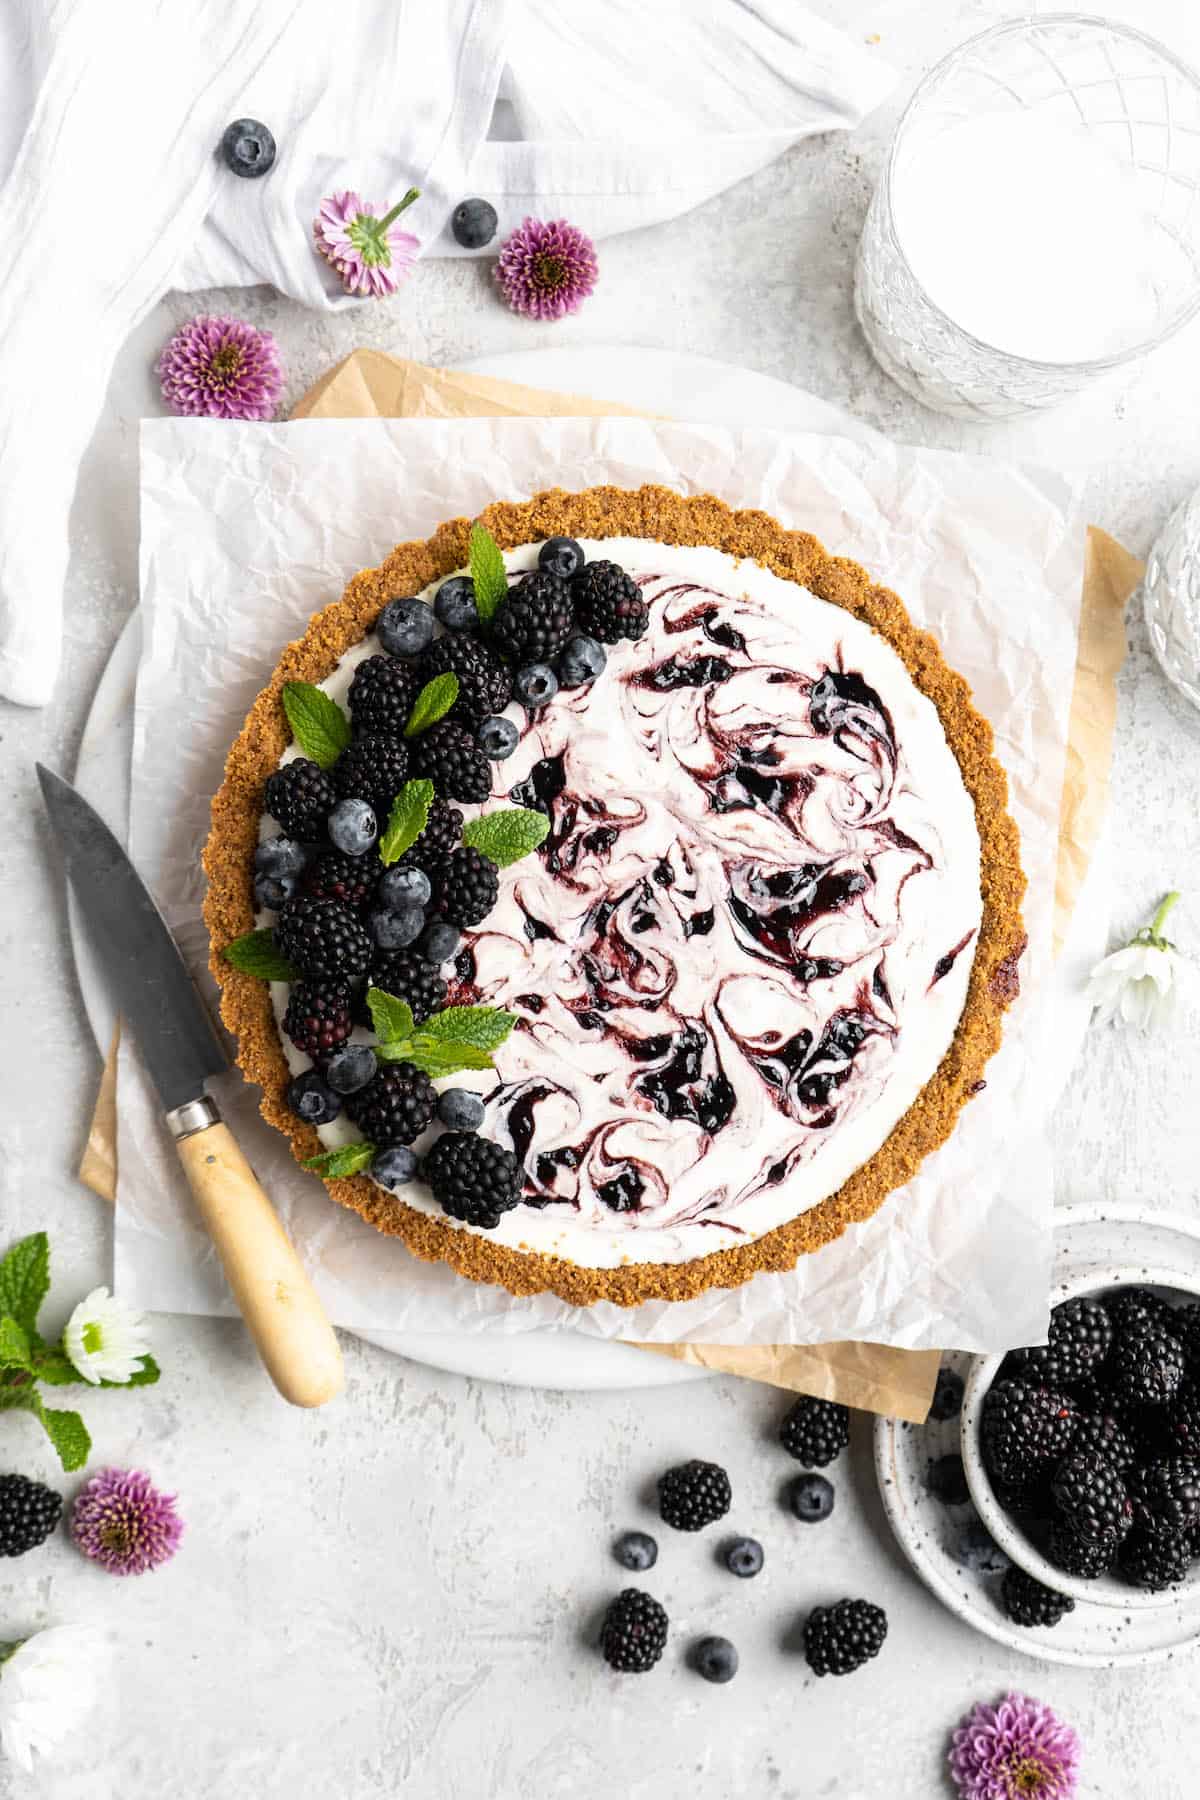 A no bake lemonade pie tart against a white background with blackberries and blueberries in a white glass bowl